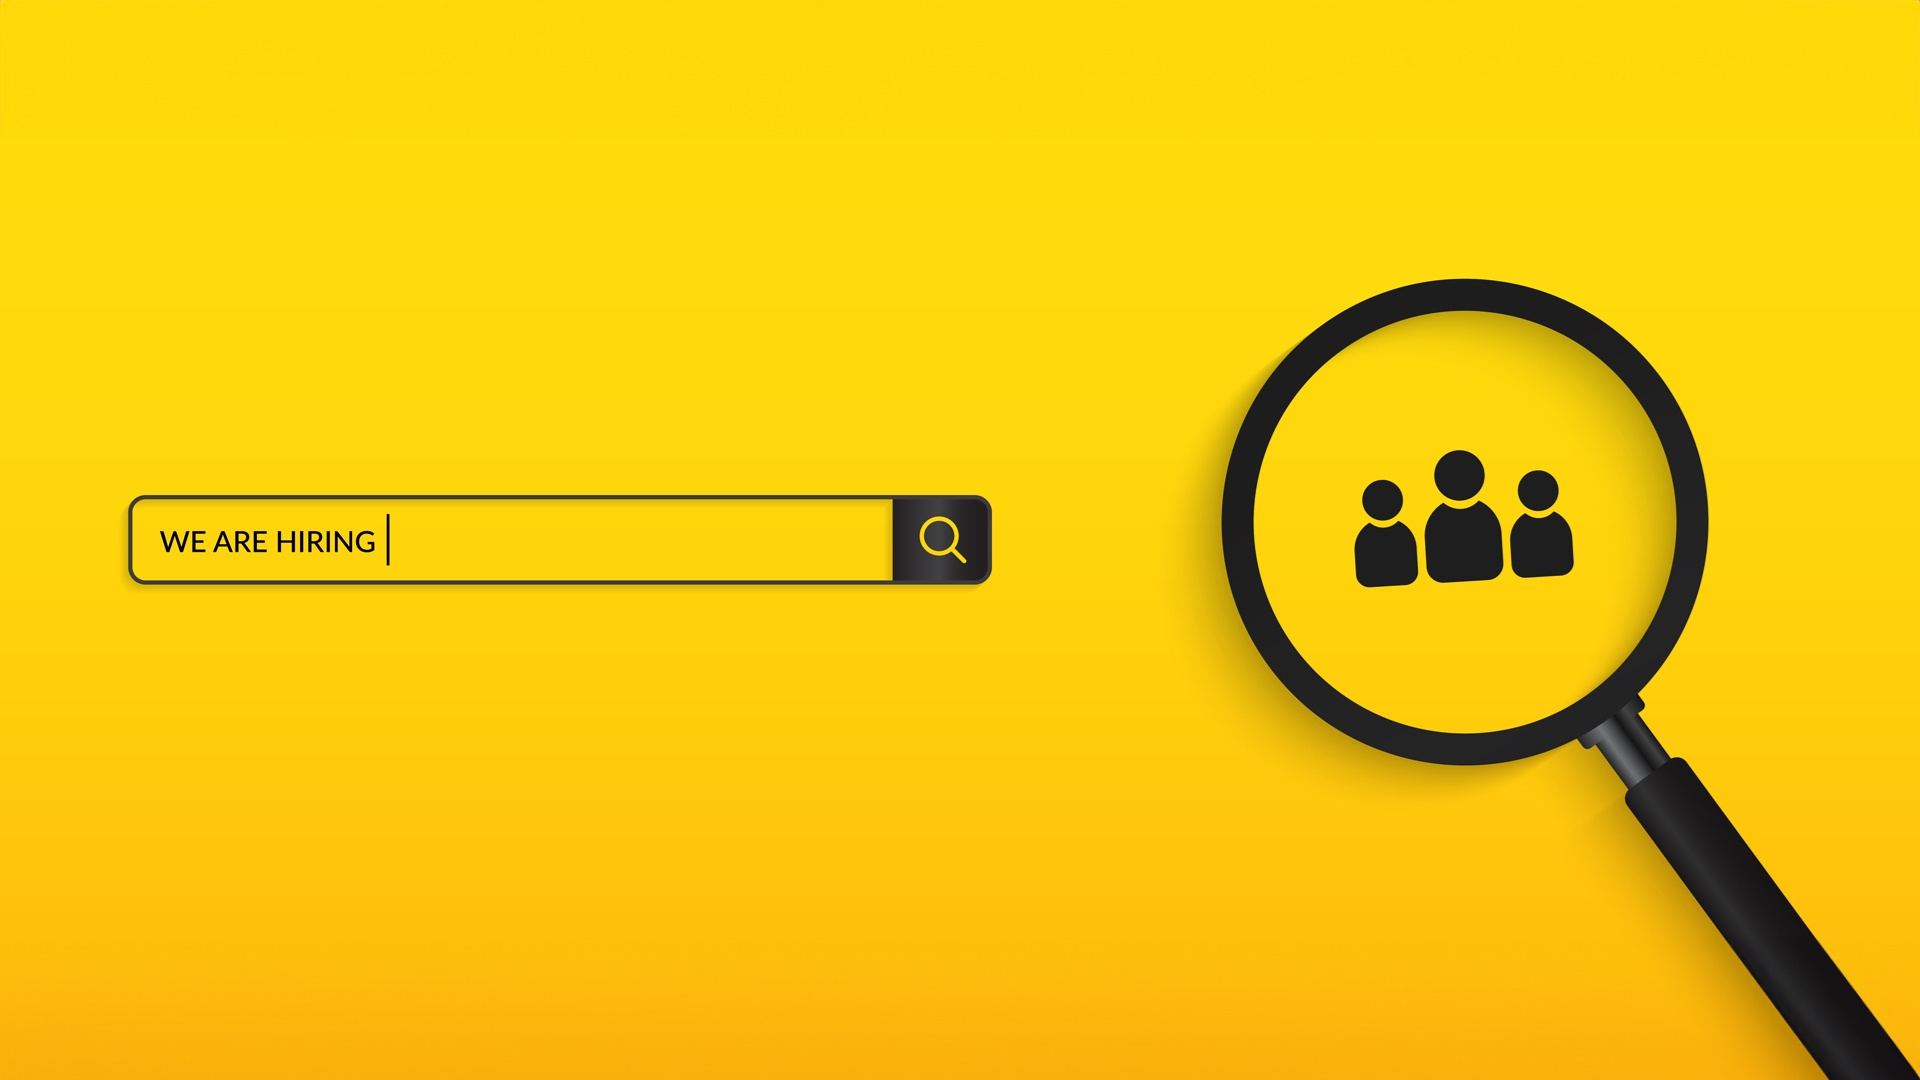 A search bar on the left and a magnifying glass on the left looking at an icon of three people on a yellow background